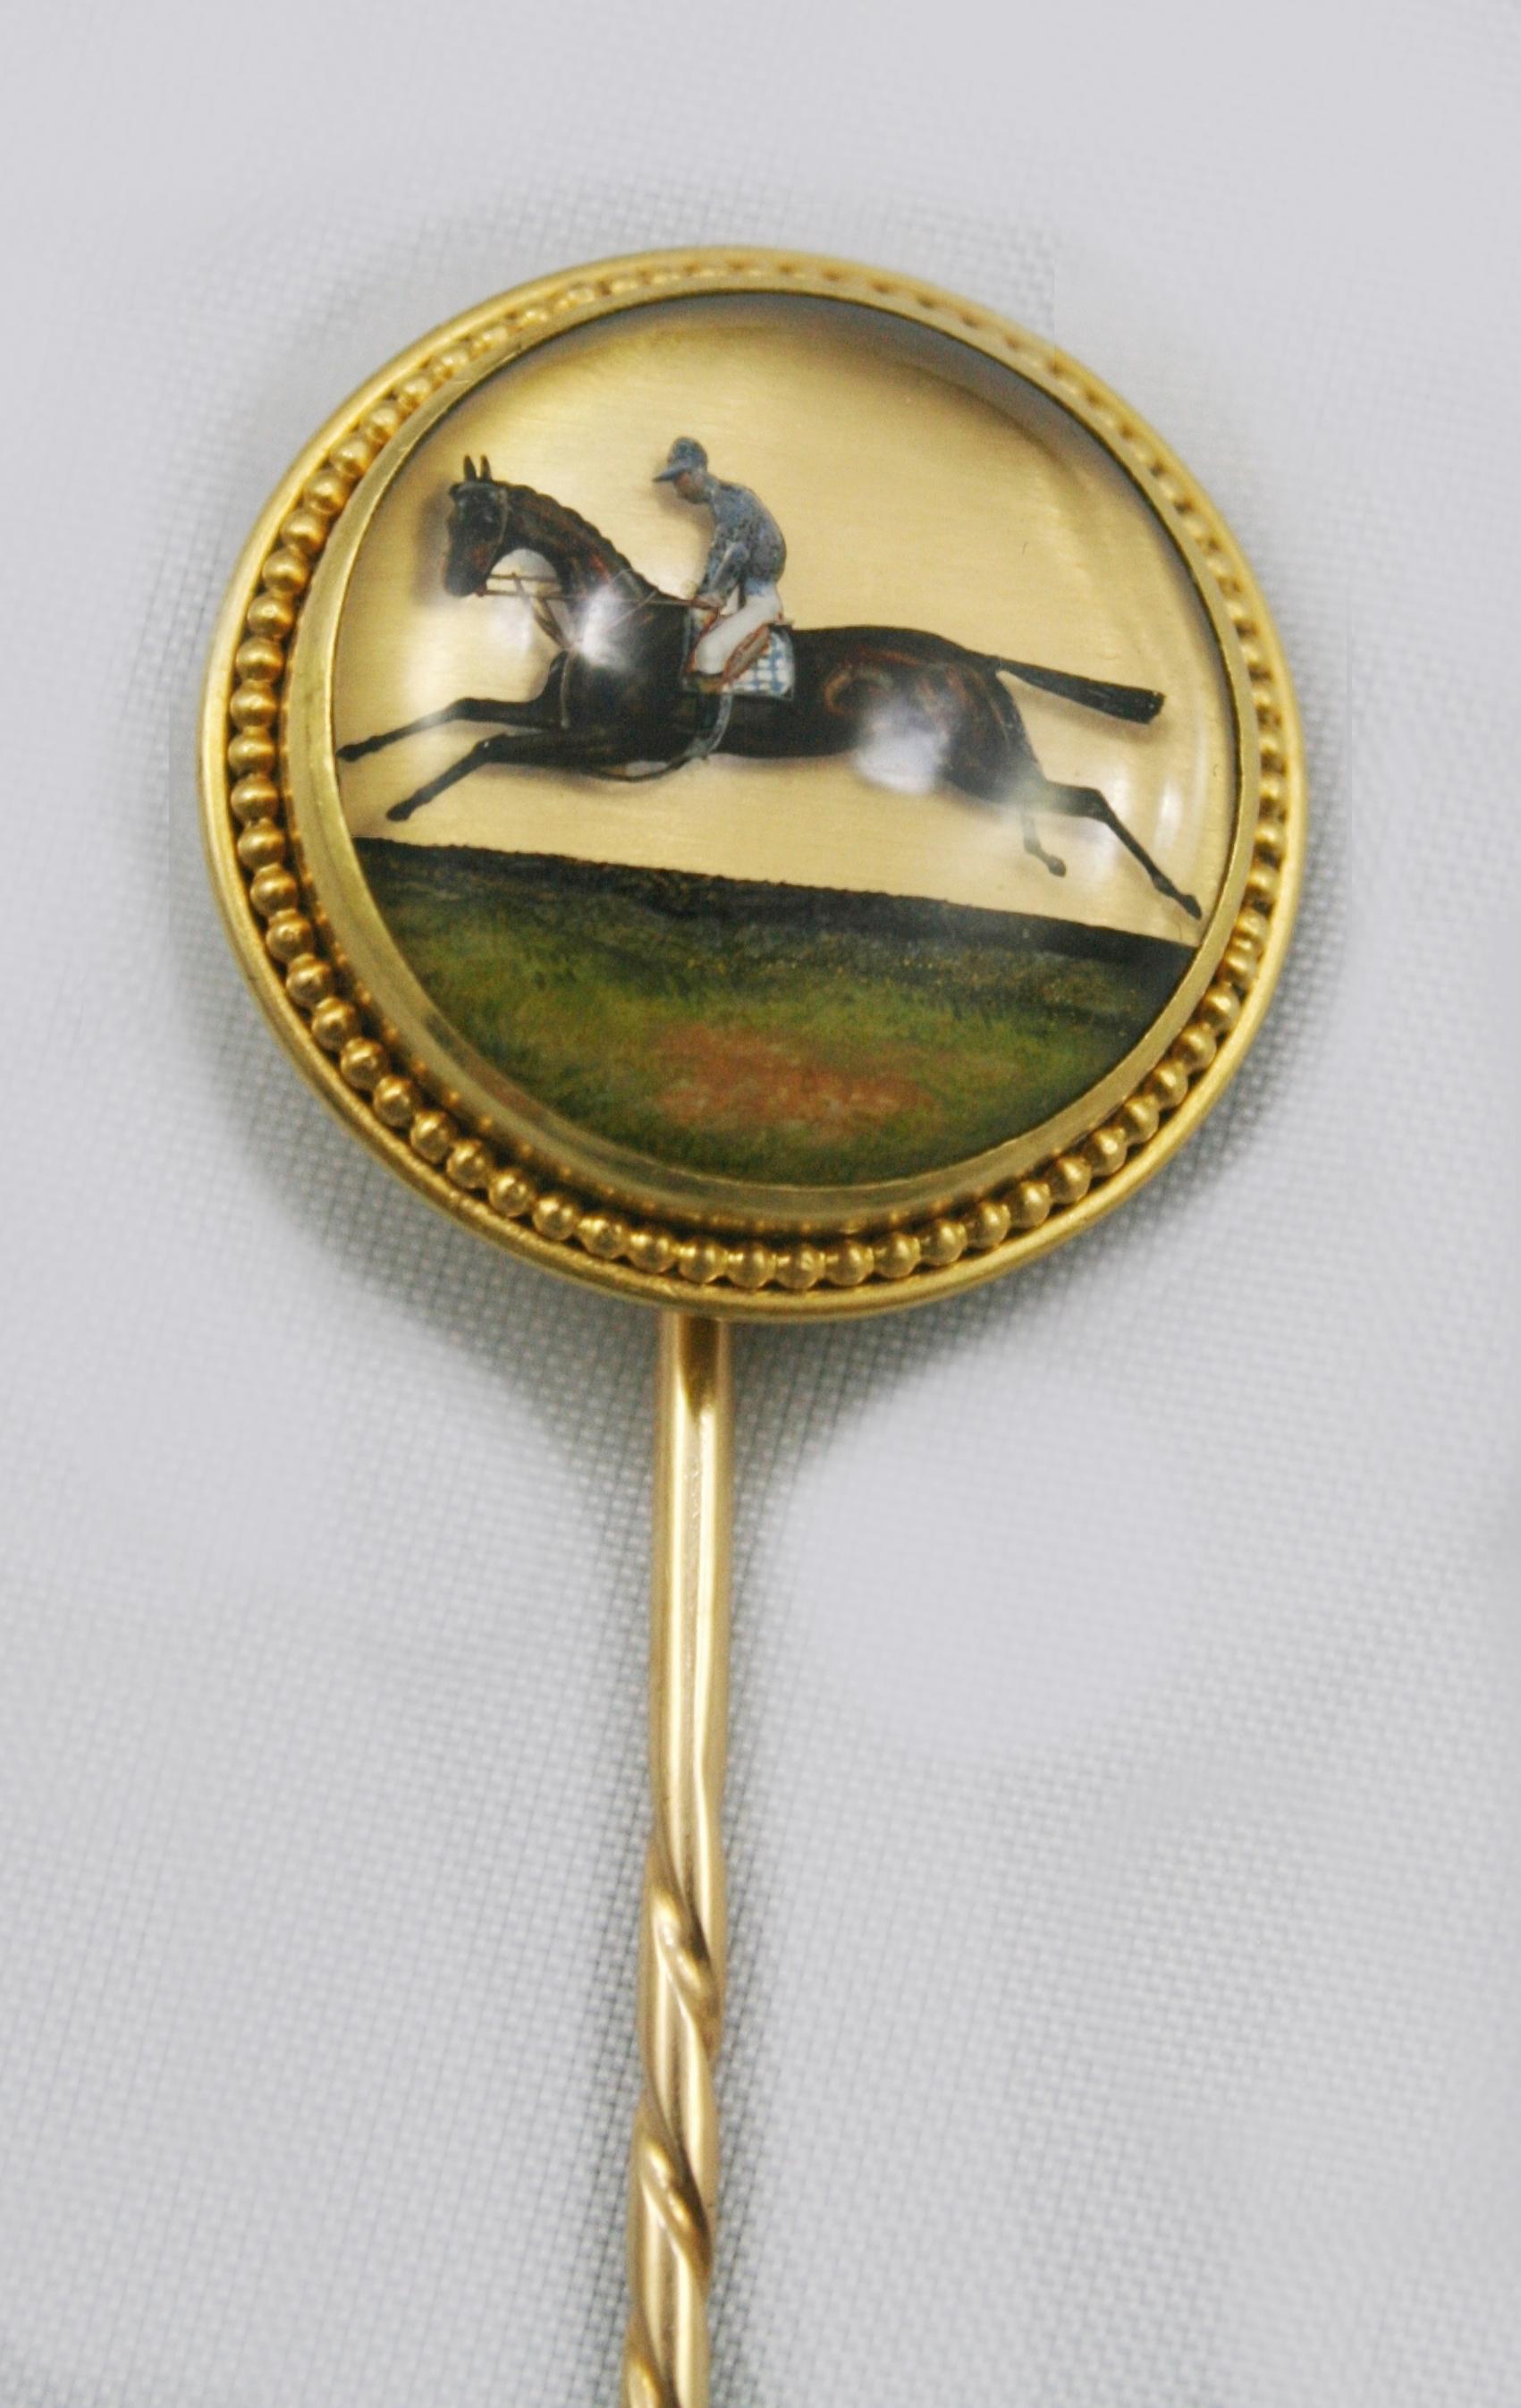 Period circa 1880
Gold 18-carat yellow
Length 8.8cm
Total weight 9.54 g
Condition Very good commensurate with age. Without hallmark, tested




Fine quality Victorian gold stick pin

Essex crystal head showing a racing horse and